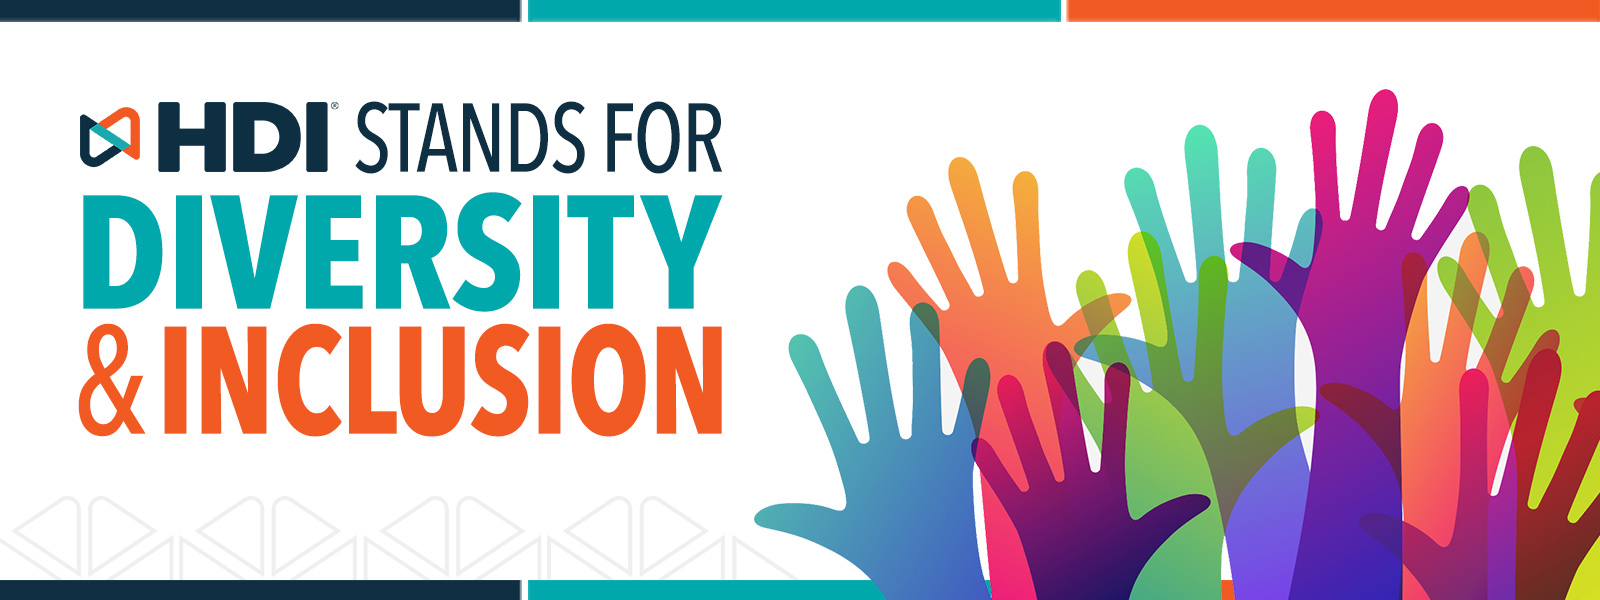 HDI Stands for Diversity & Inclusion.  Click here for more.